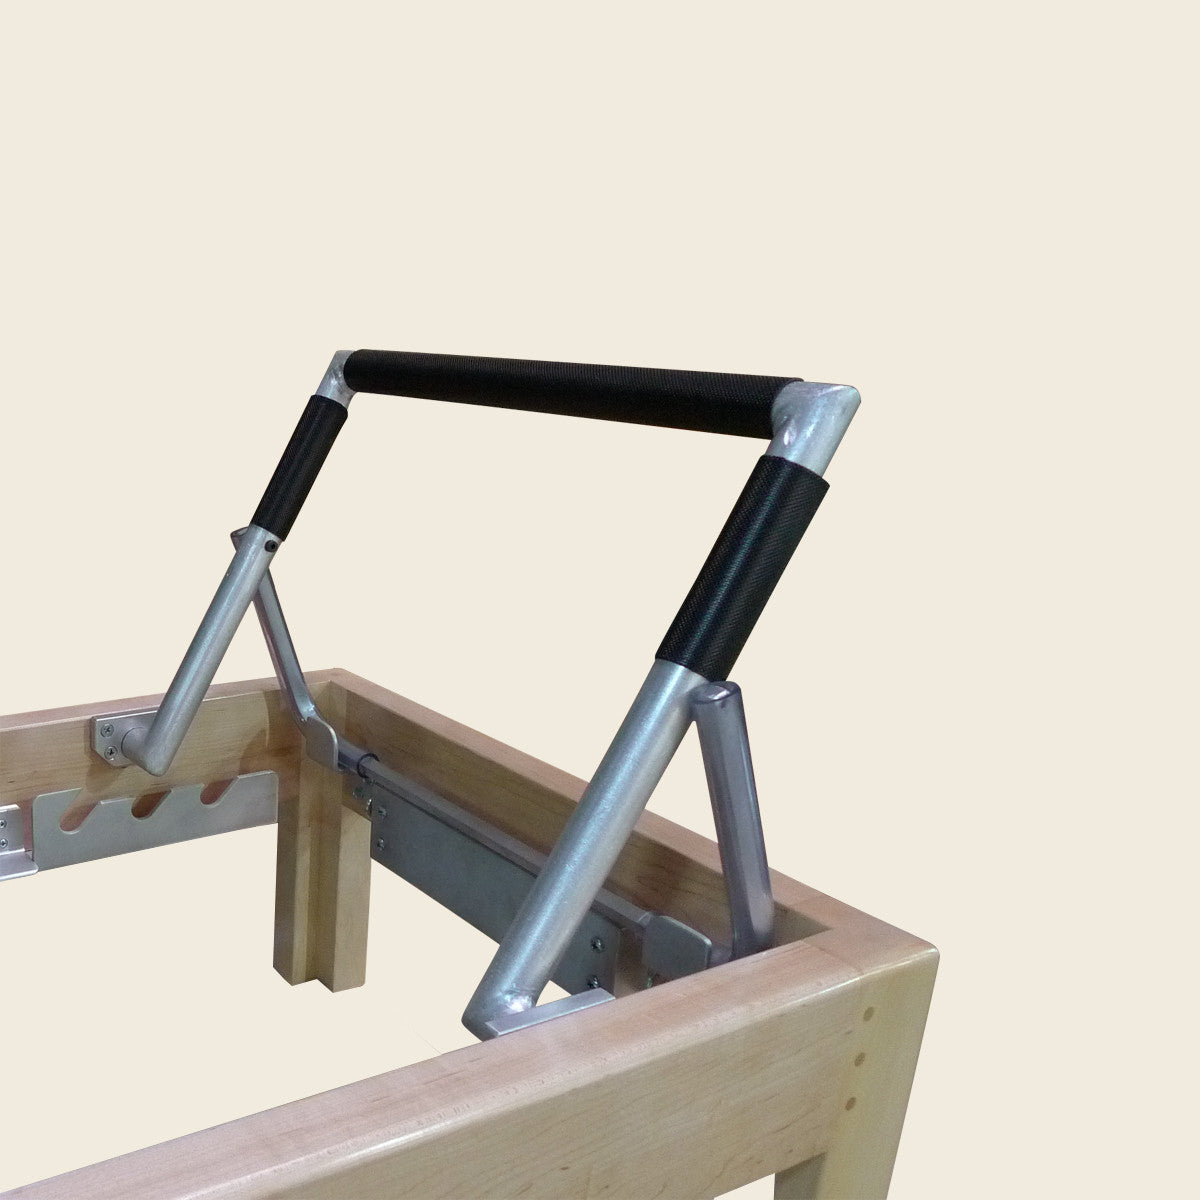 Direct Contact Foot Bar Cover For Reformer